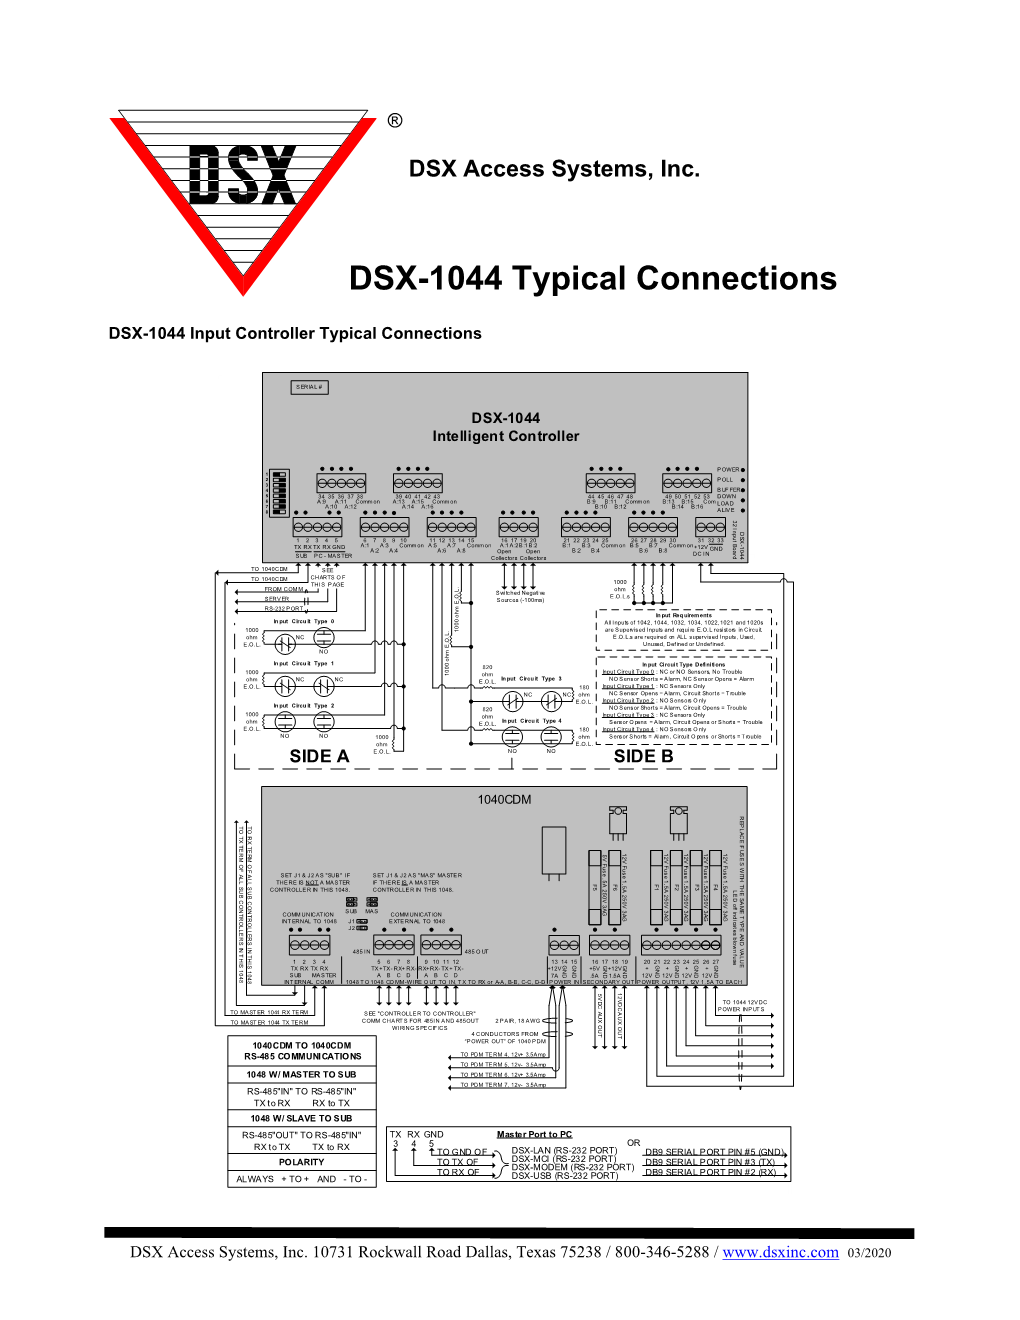 DSX-1044 Typical Connections